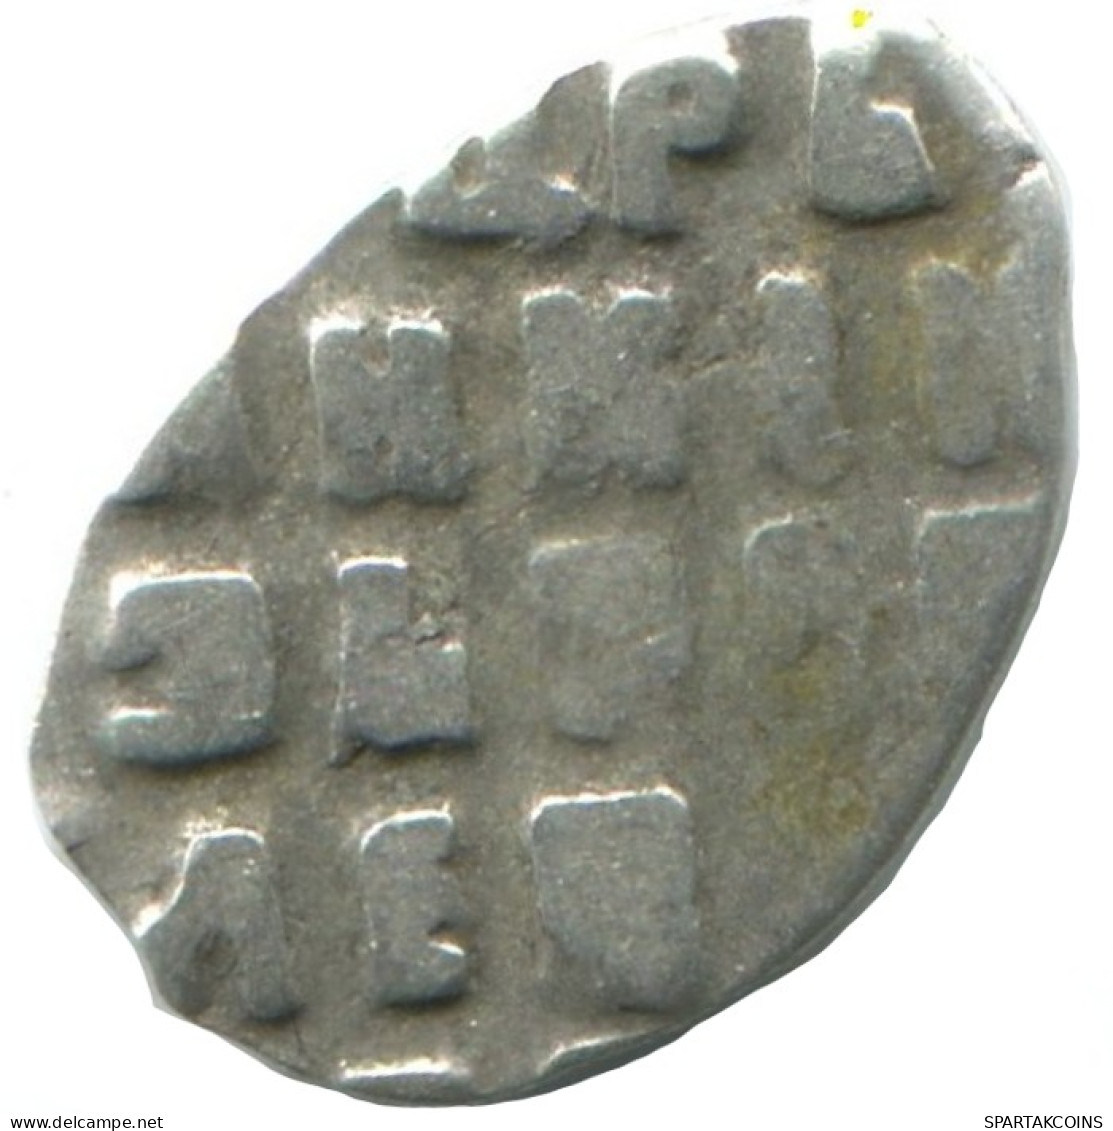 RUSSLAND RUSSIA 1696-1717 KOPECK PETER I SILBER 0.3g/9mm #AB694.10.D.A - Russia